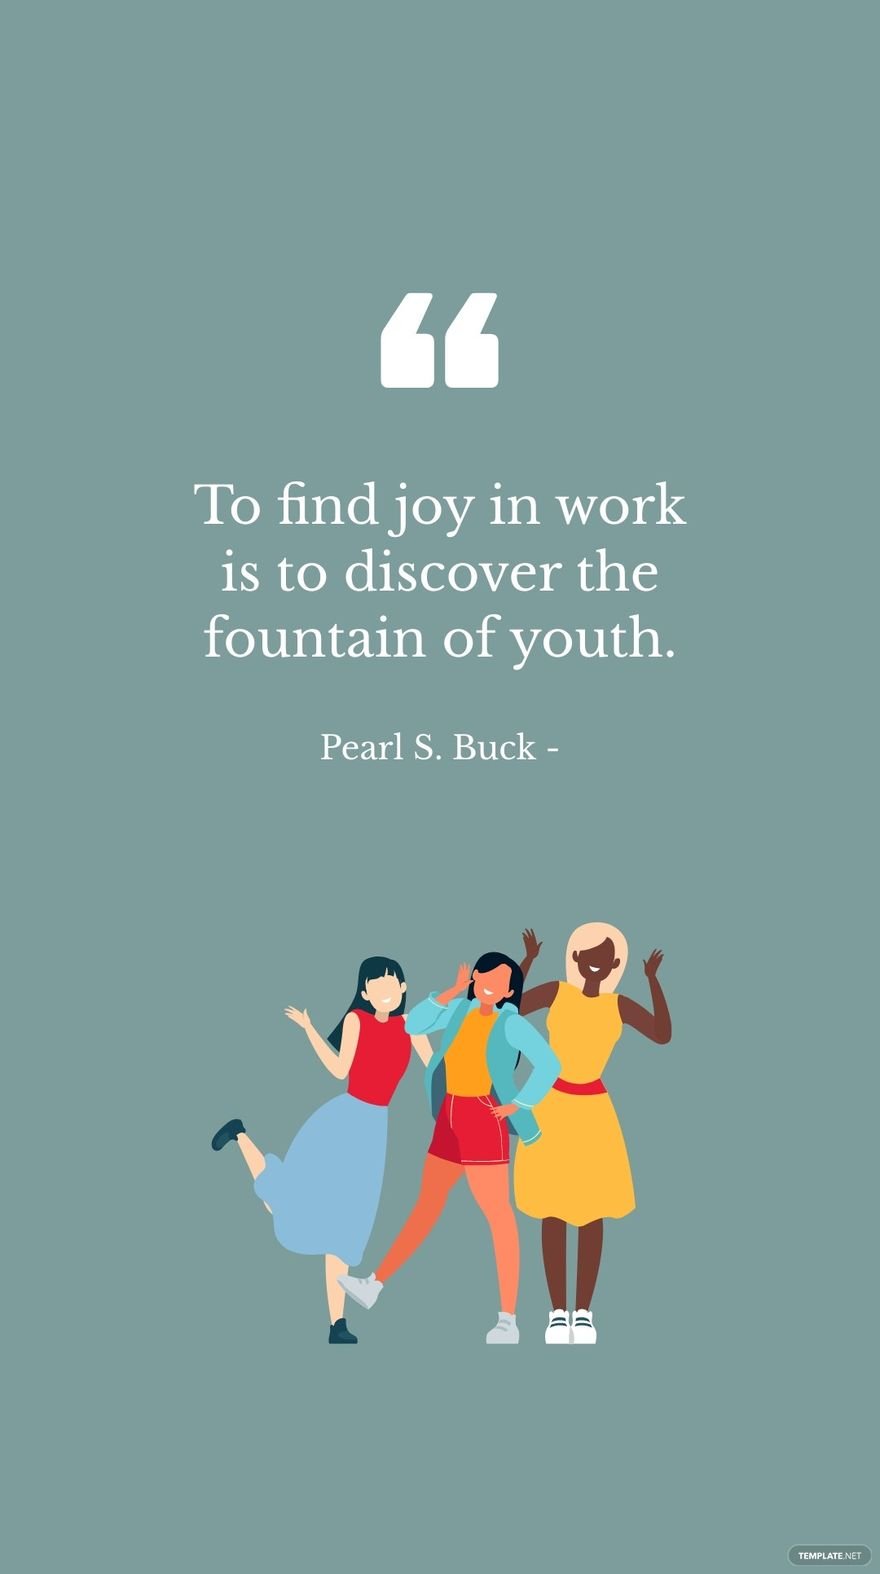 Pearl S. Buck - To find joy in work is to discover the fountain of youth. in JPG